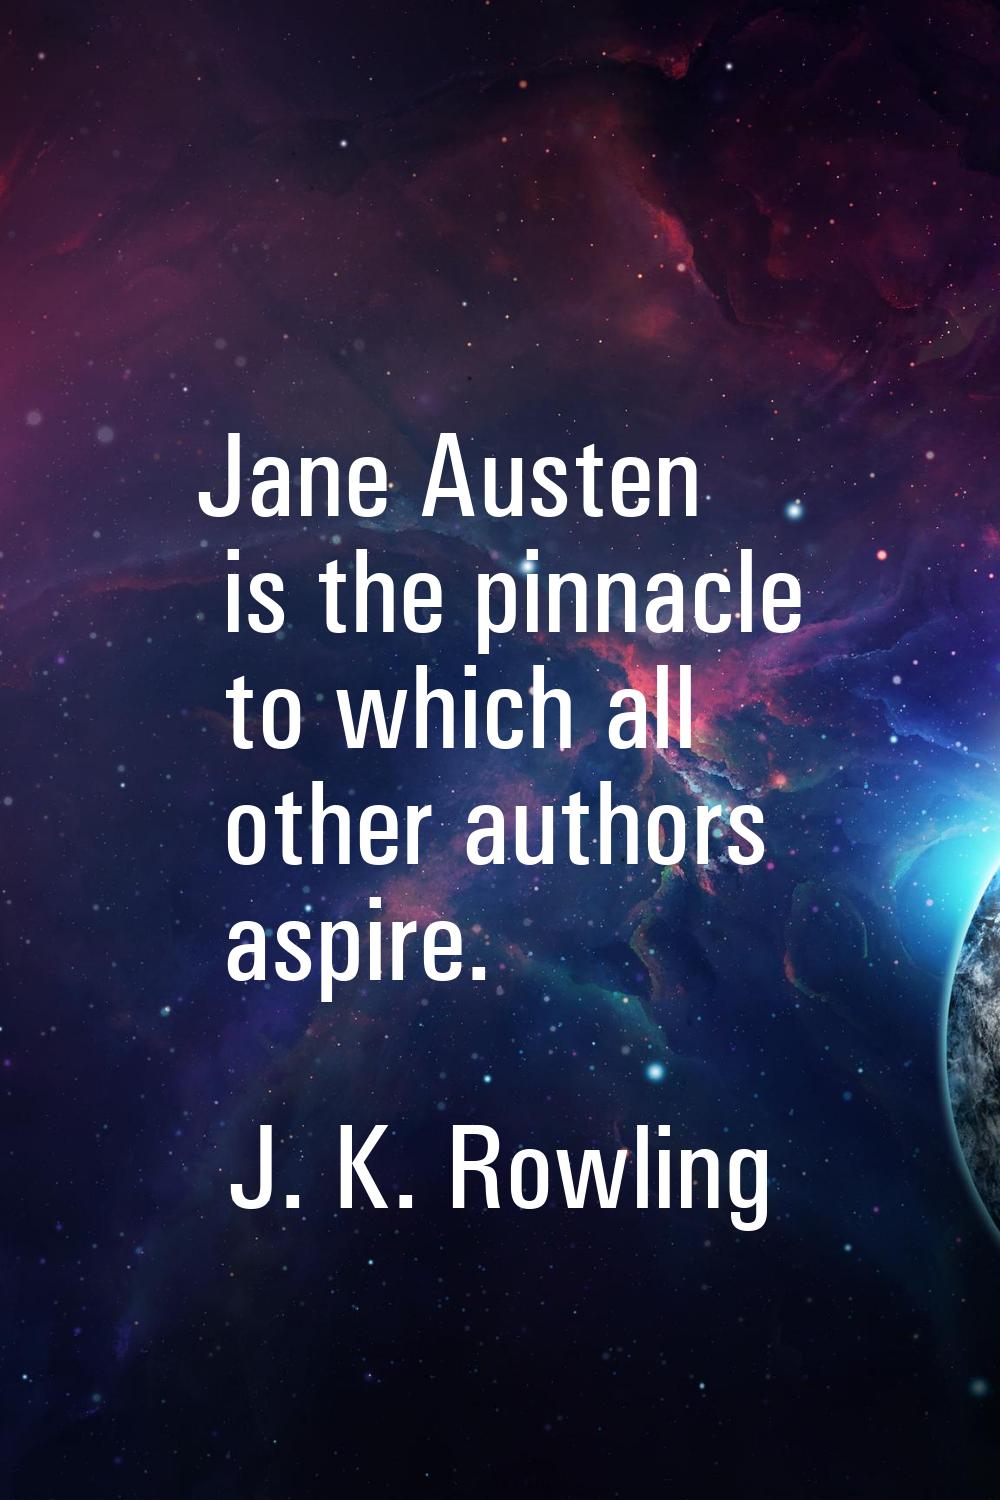 Jane Austen is the pinnacle to which all other authors aspire.